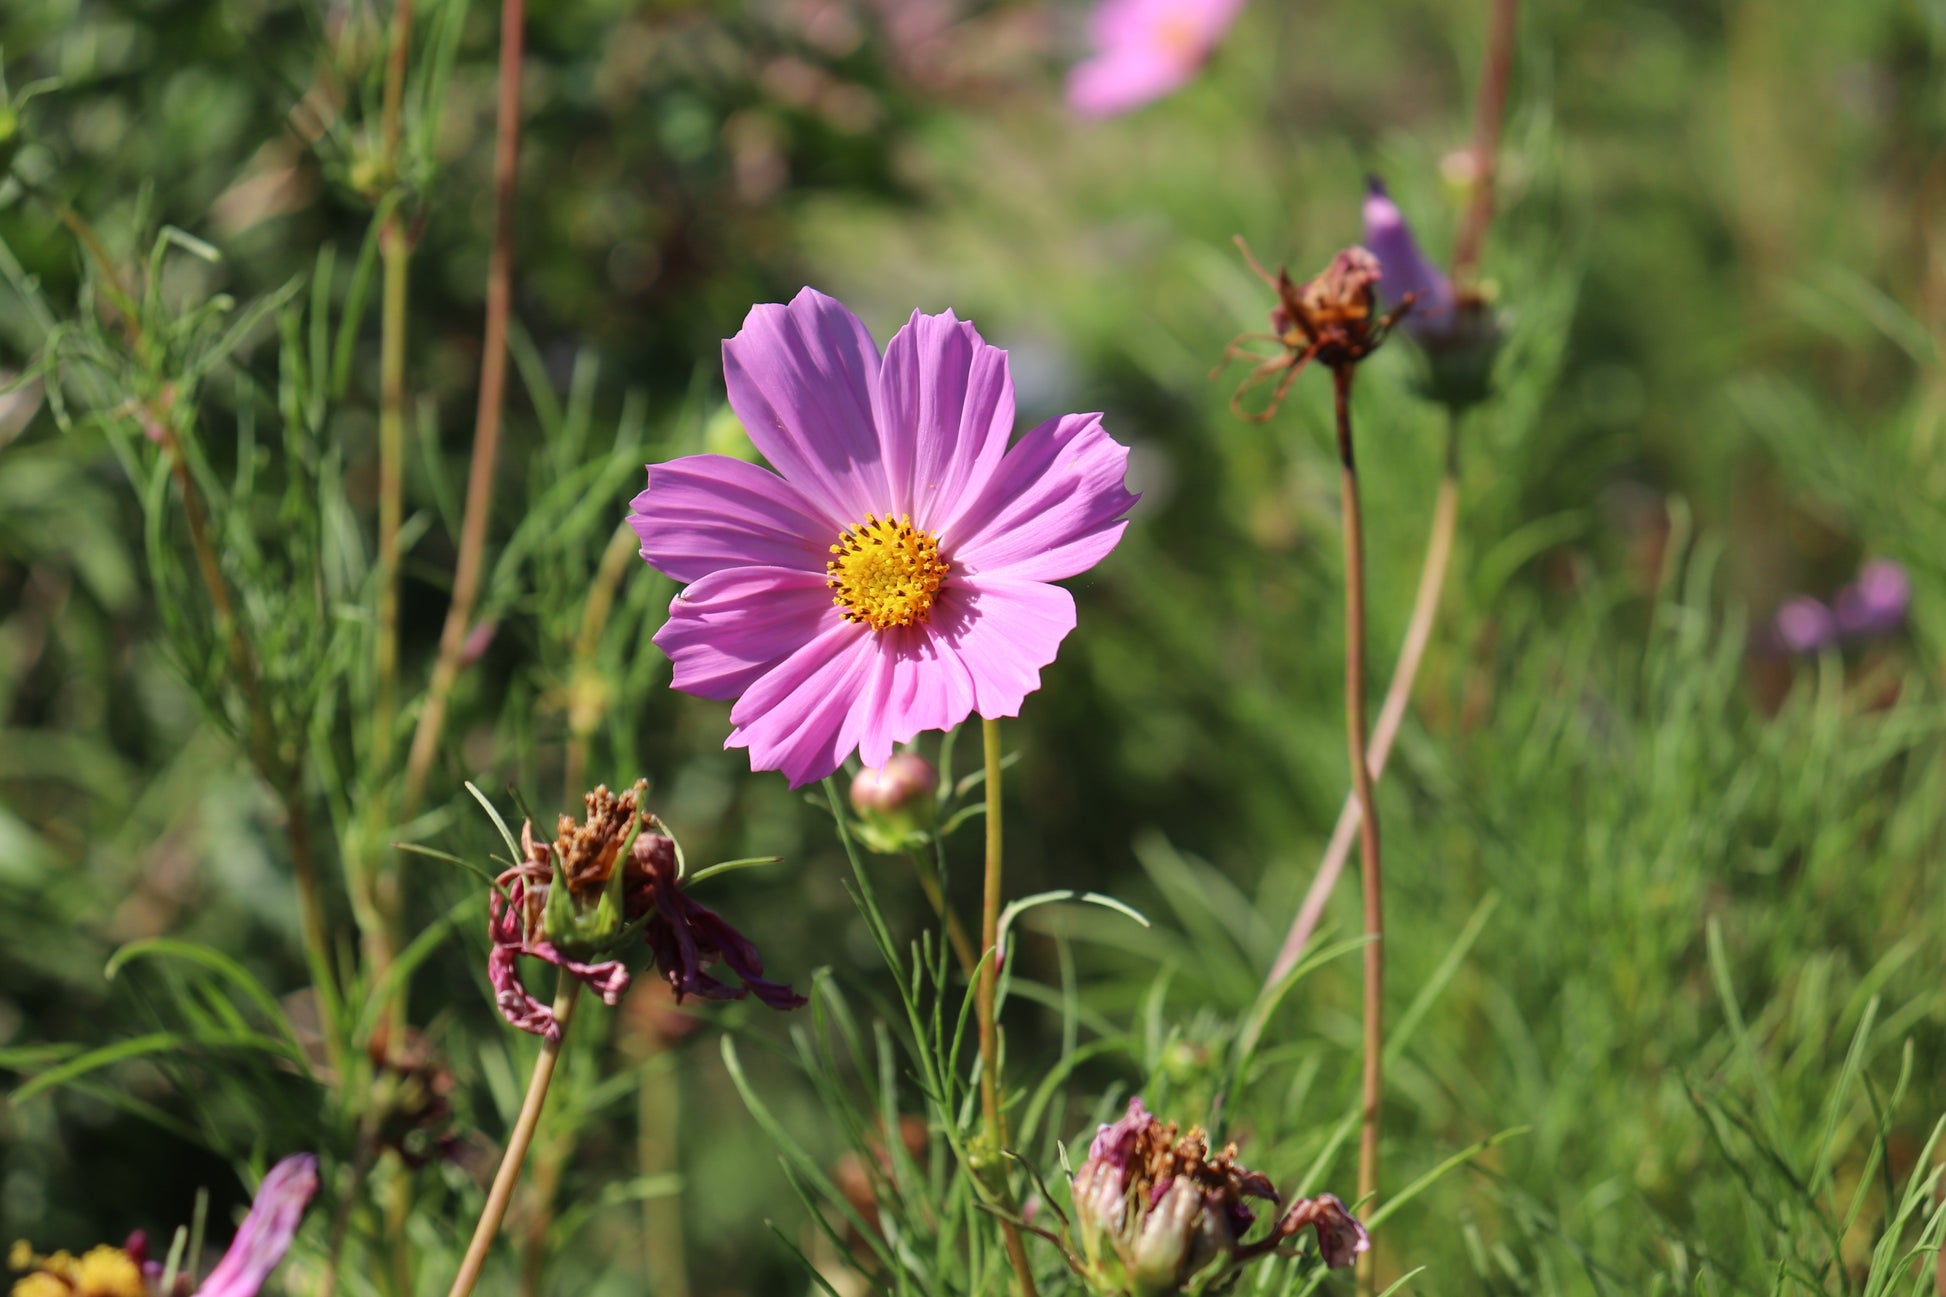 Close up of the purple flower with yellow center Cosmos.